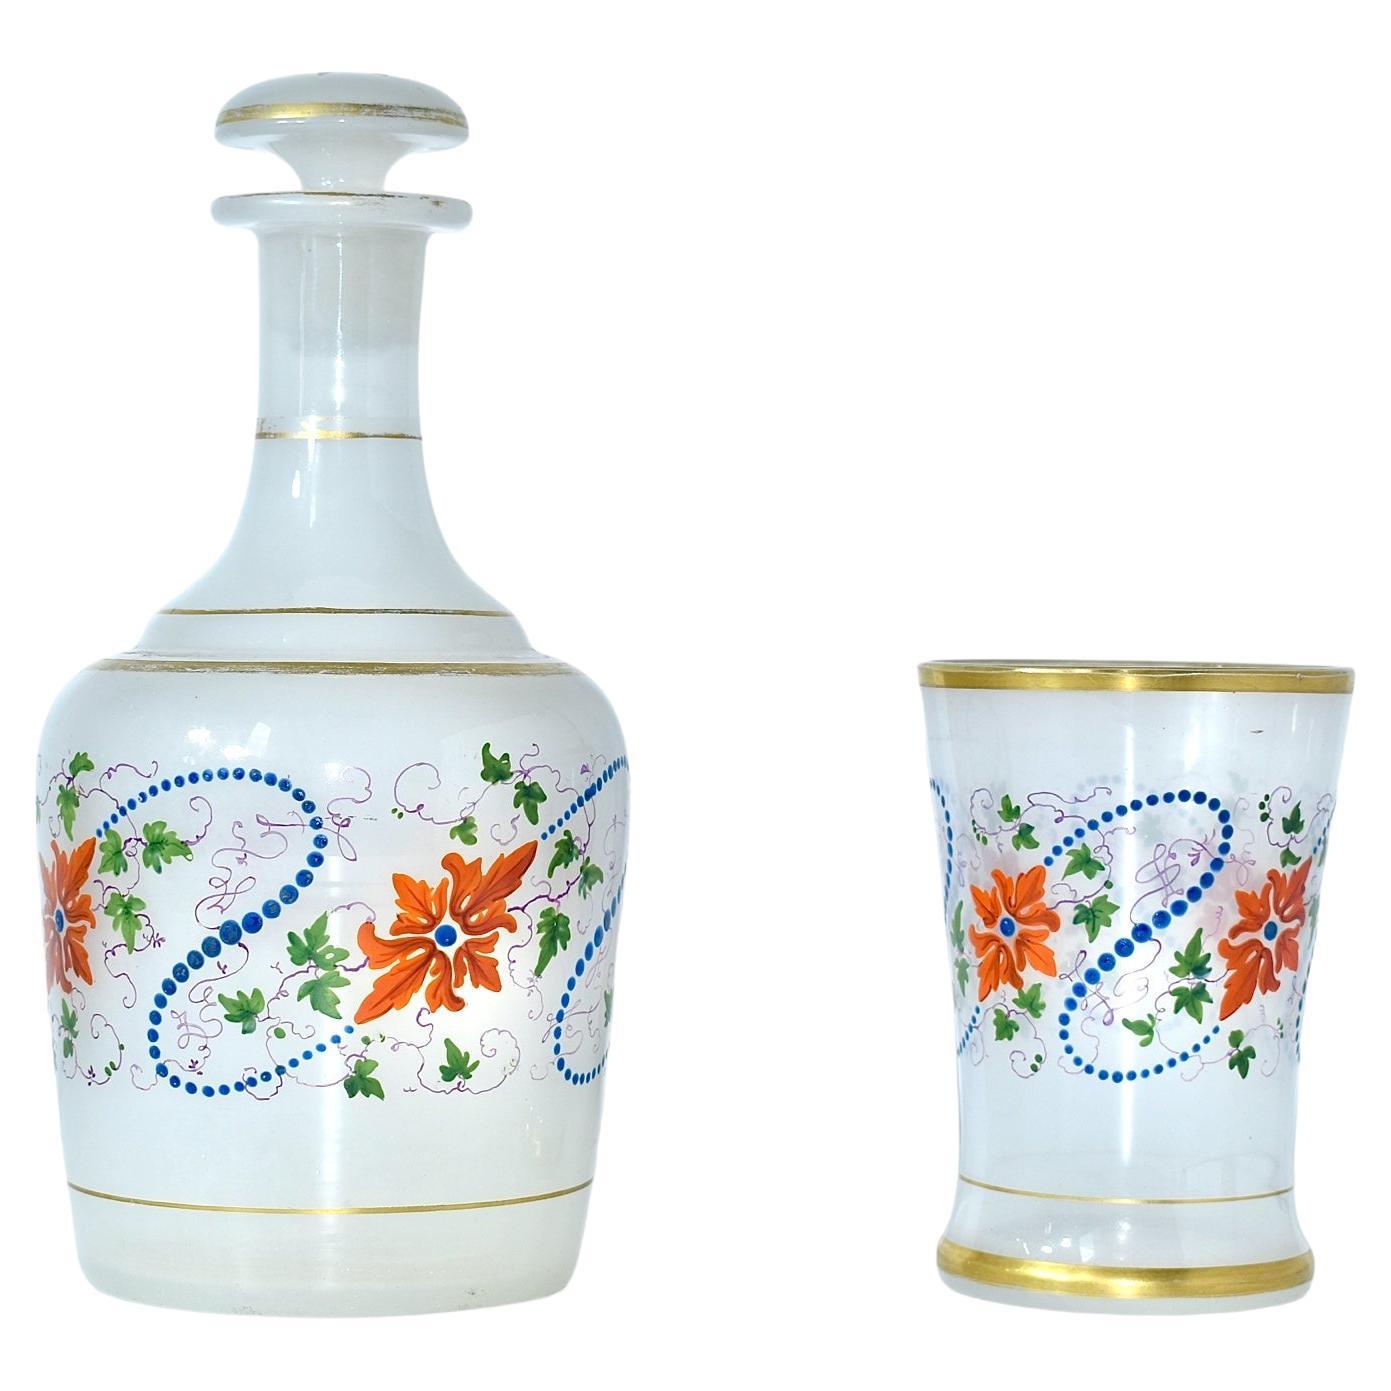 Antique Moser Opaline Enameled Glass Bottle and Glass, 19th Century In Good Condition For Sale In Rostock, MV